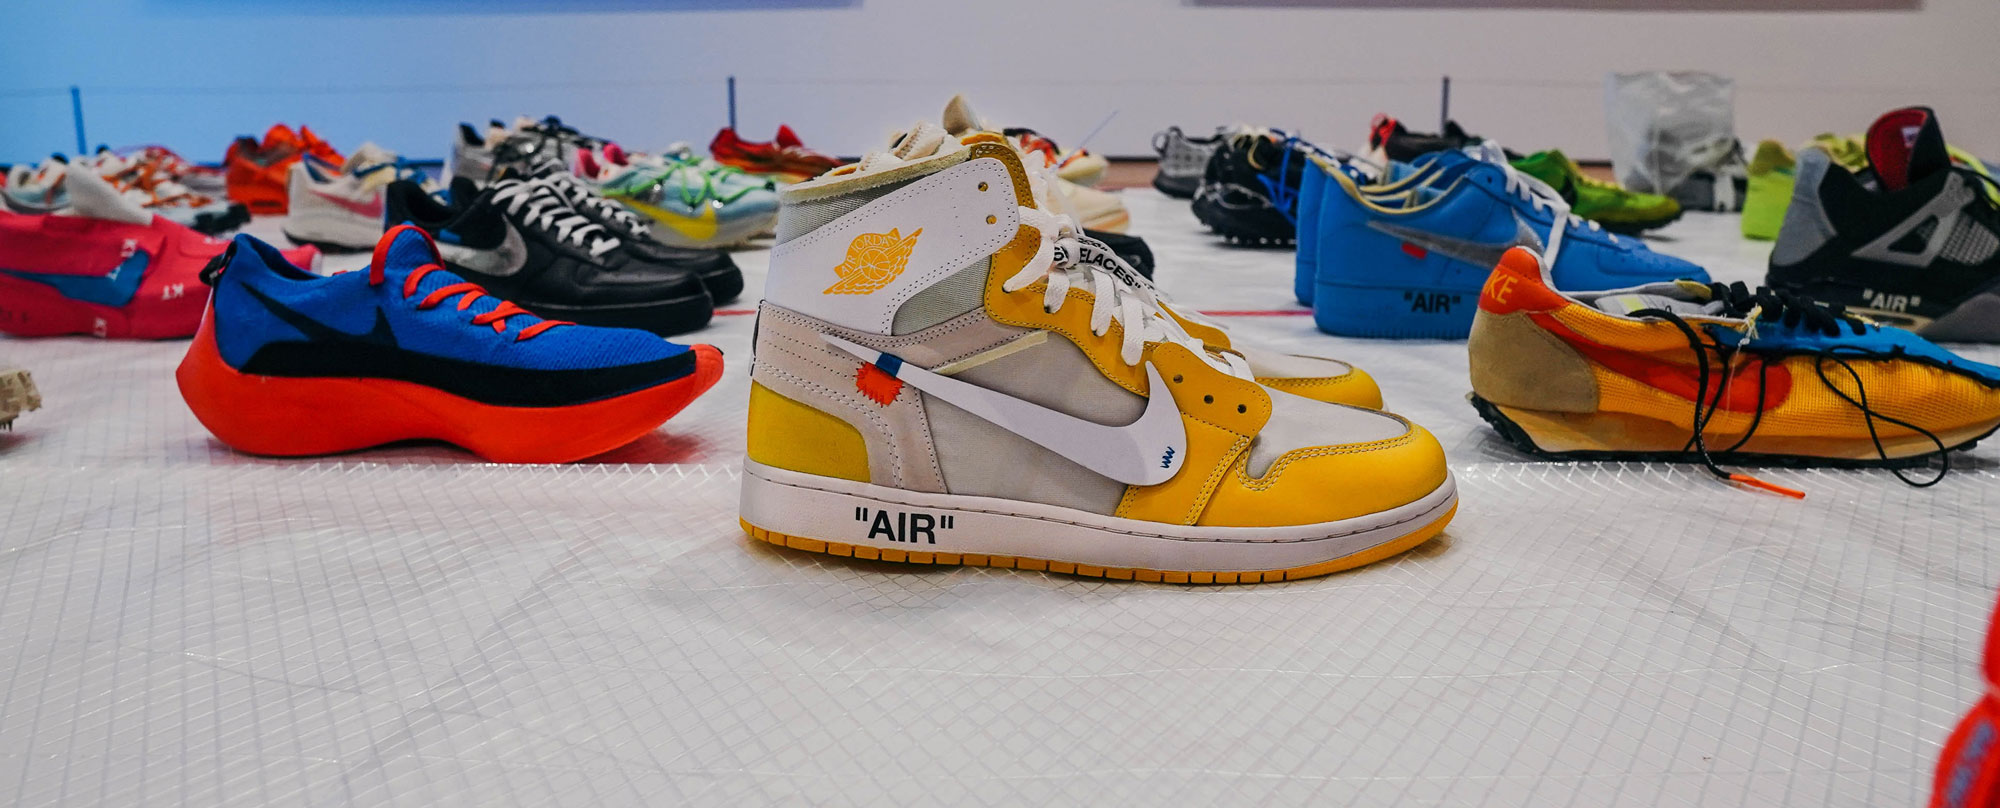 Nike x Off-White Dunk Low Sneakers Have Sneakerheads Buzzing